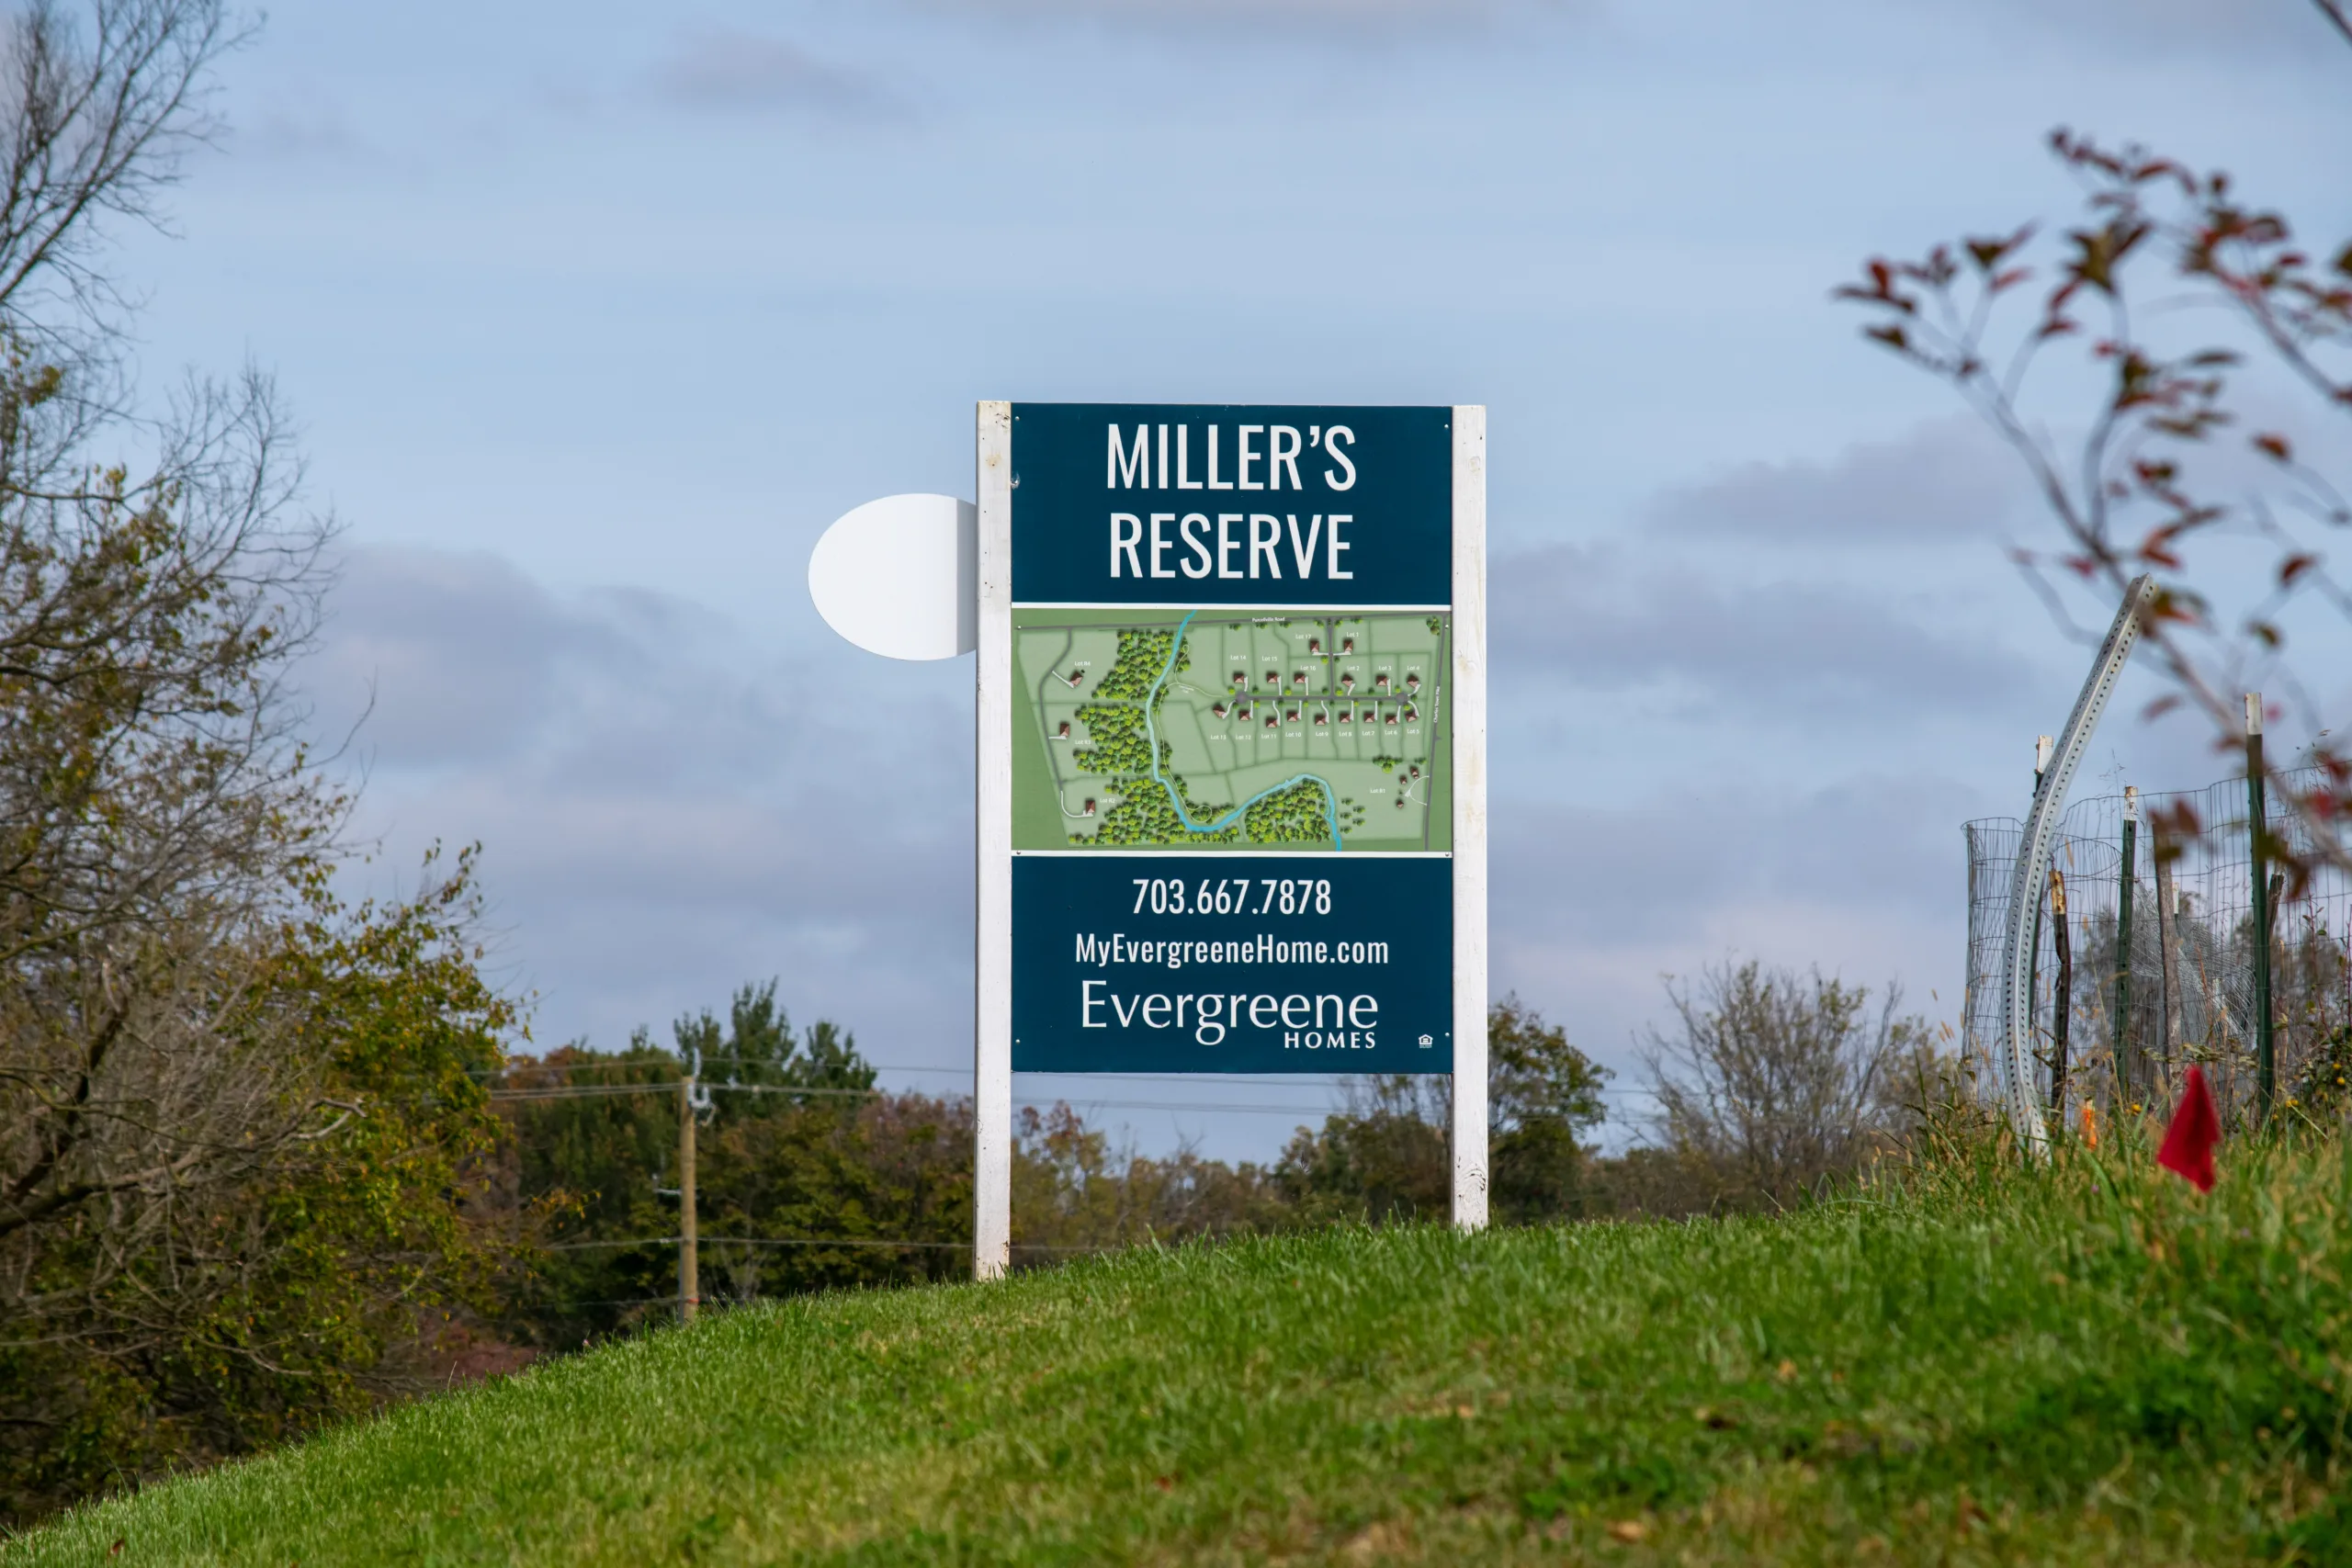 Miller's Reserve road sign with a map of lots